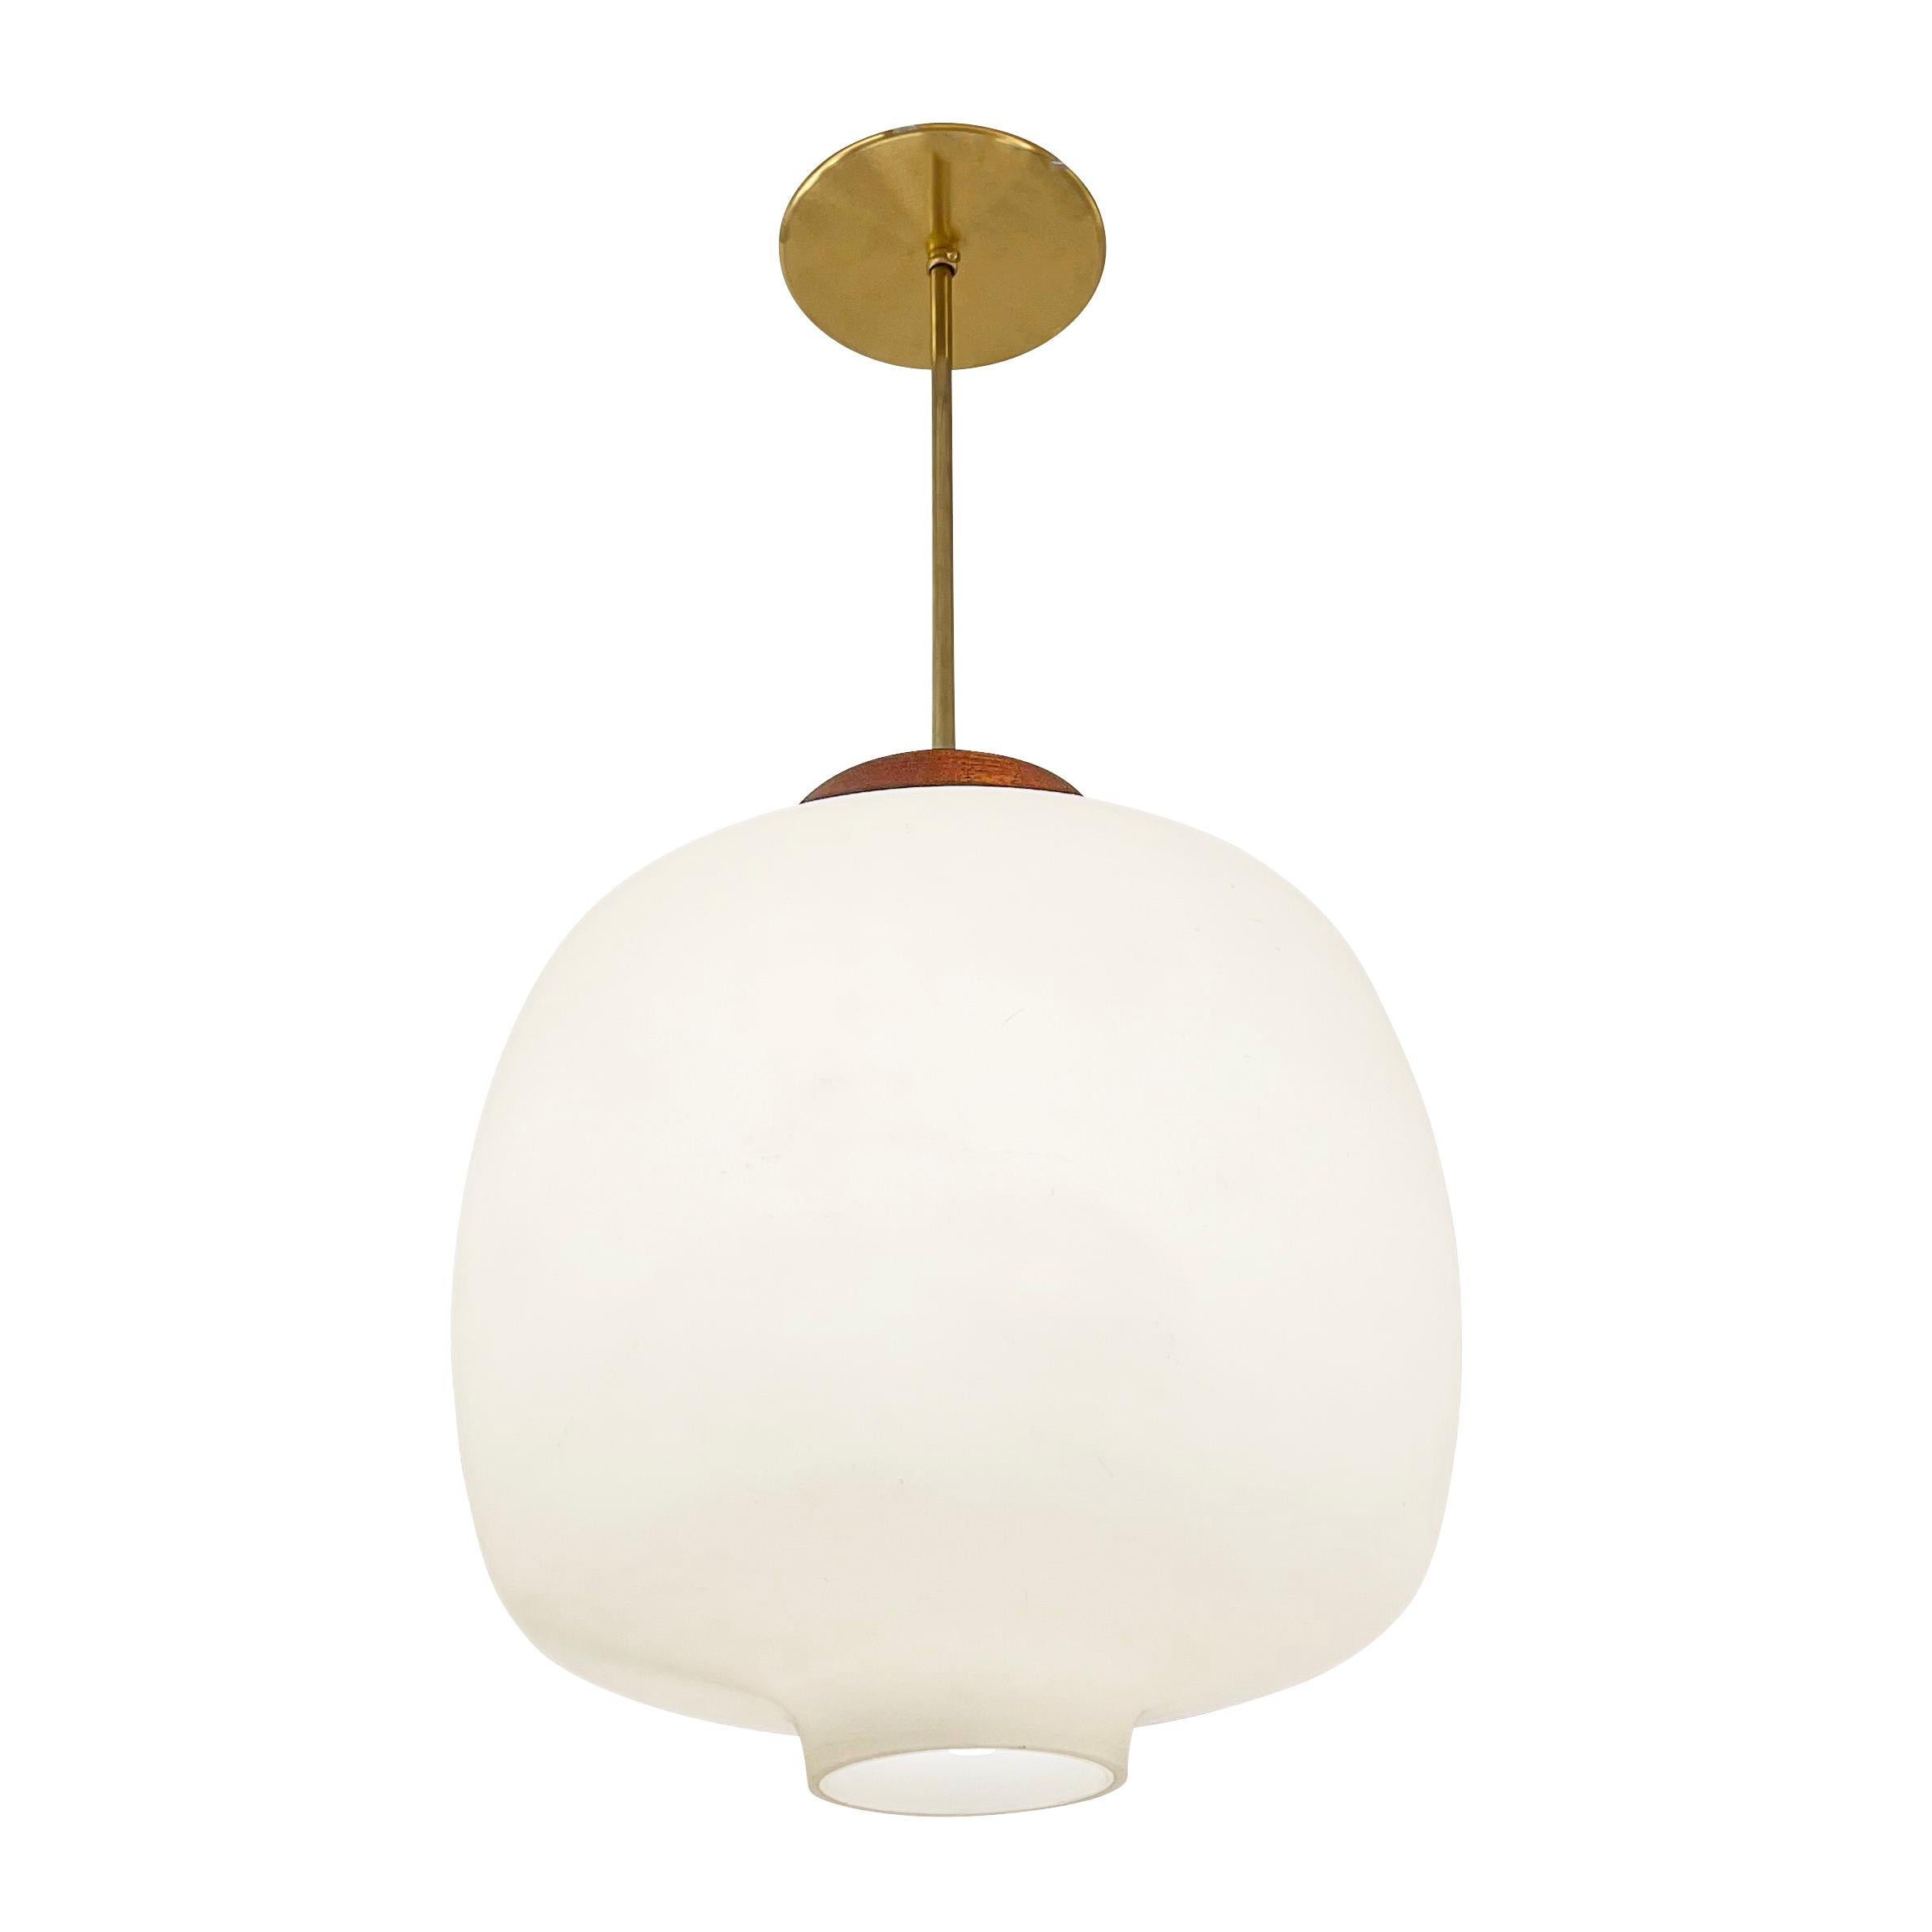 Italian midcentury pendant with a frosted glass shade, wood cap and brass stem and canopy. Designed by Angello Lelli for Arredoluce. Holds one E26 socket. Height of stem can be adjusted as needed

Condition: Good vintage condition, minor wear and